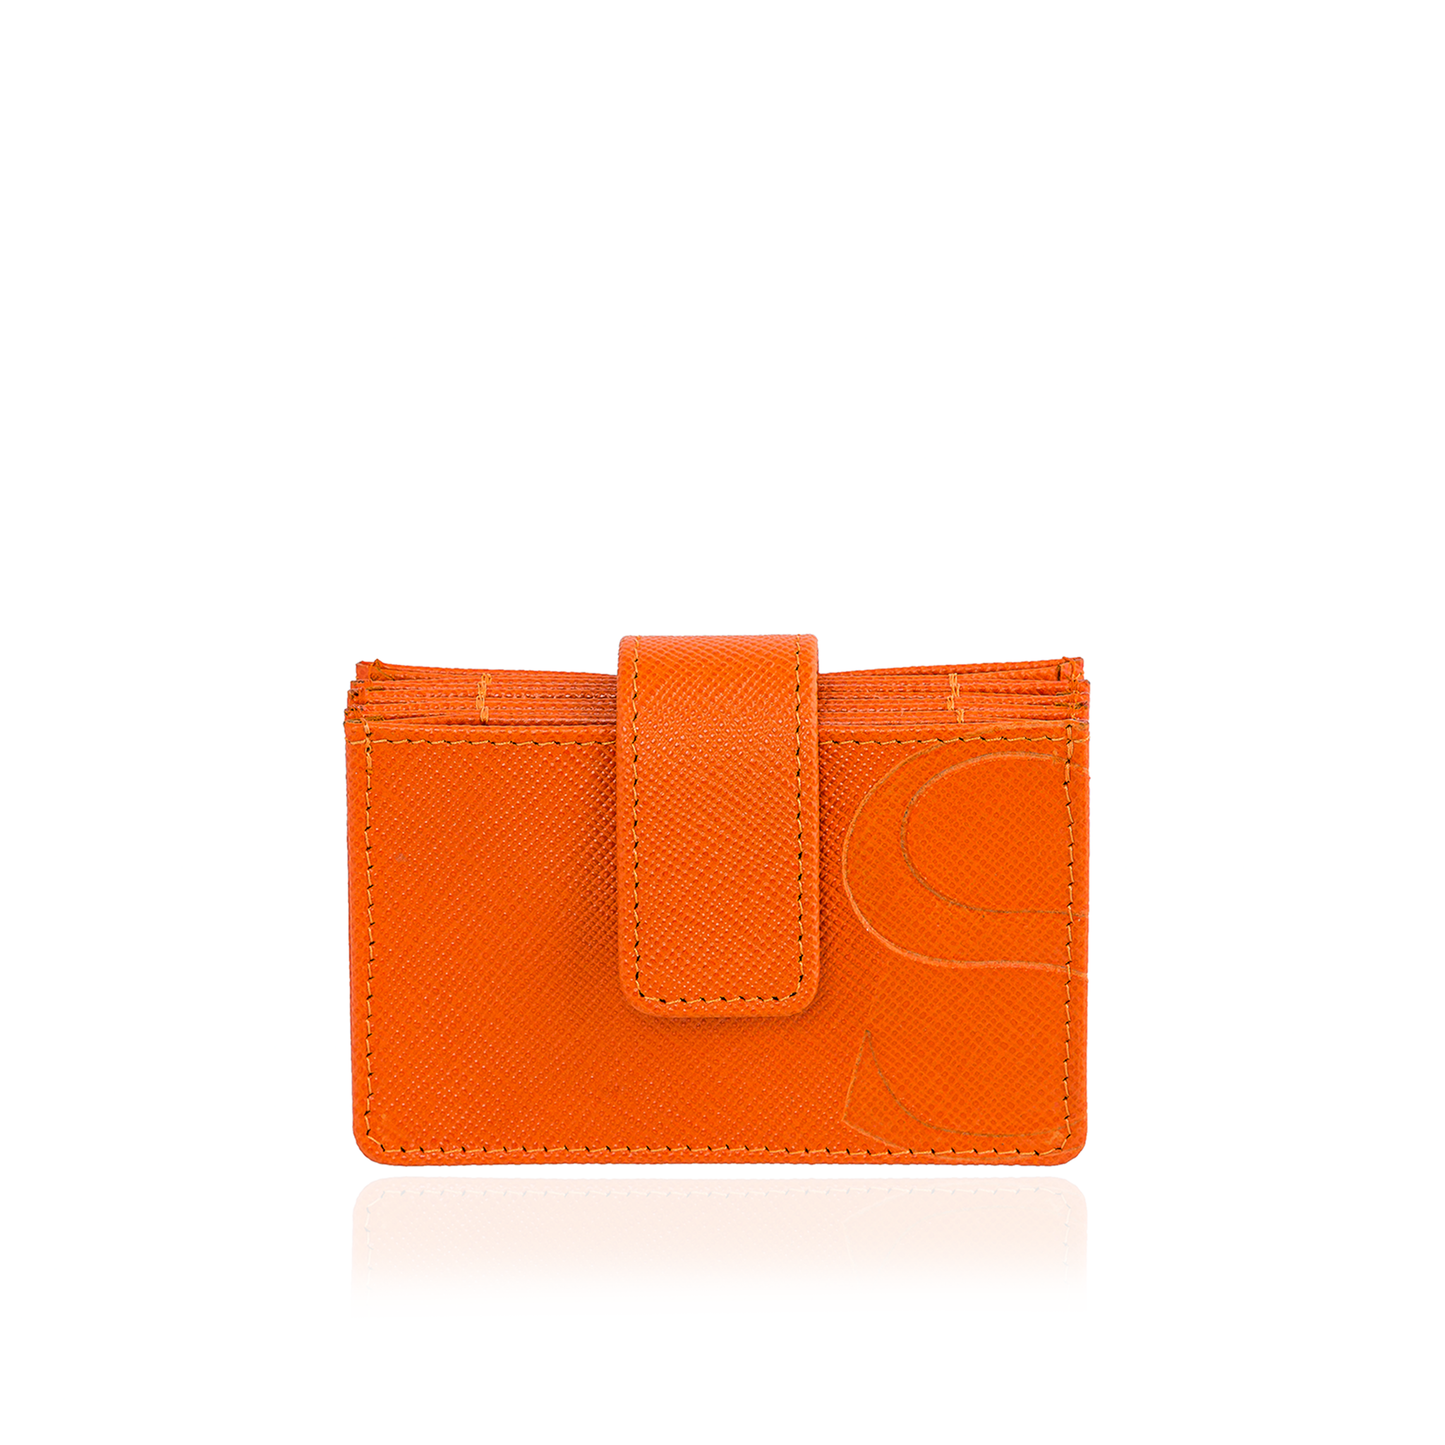 Credit Card Accordion Wallet in Orange Textured Leather